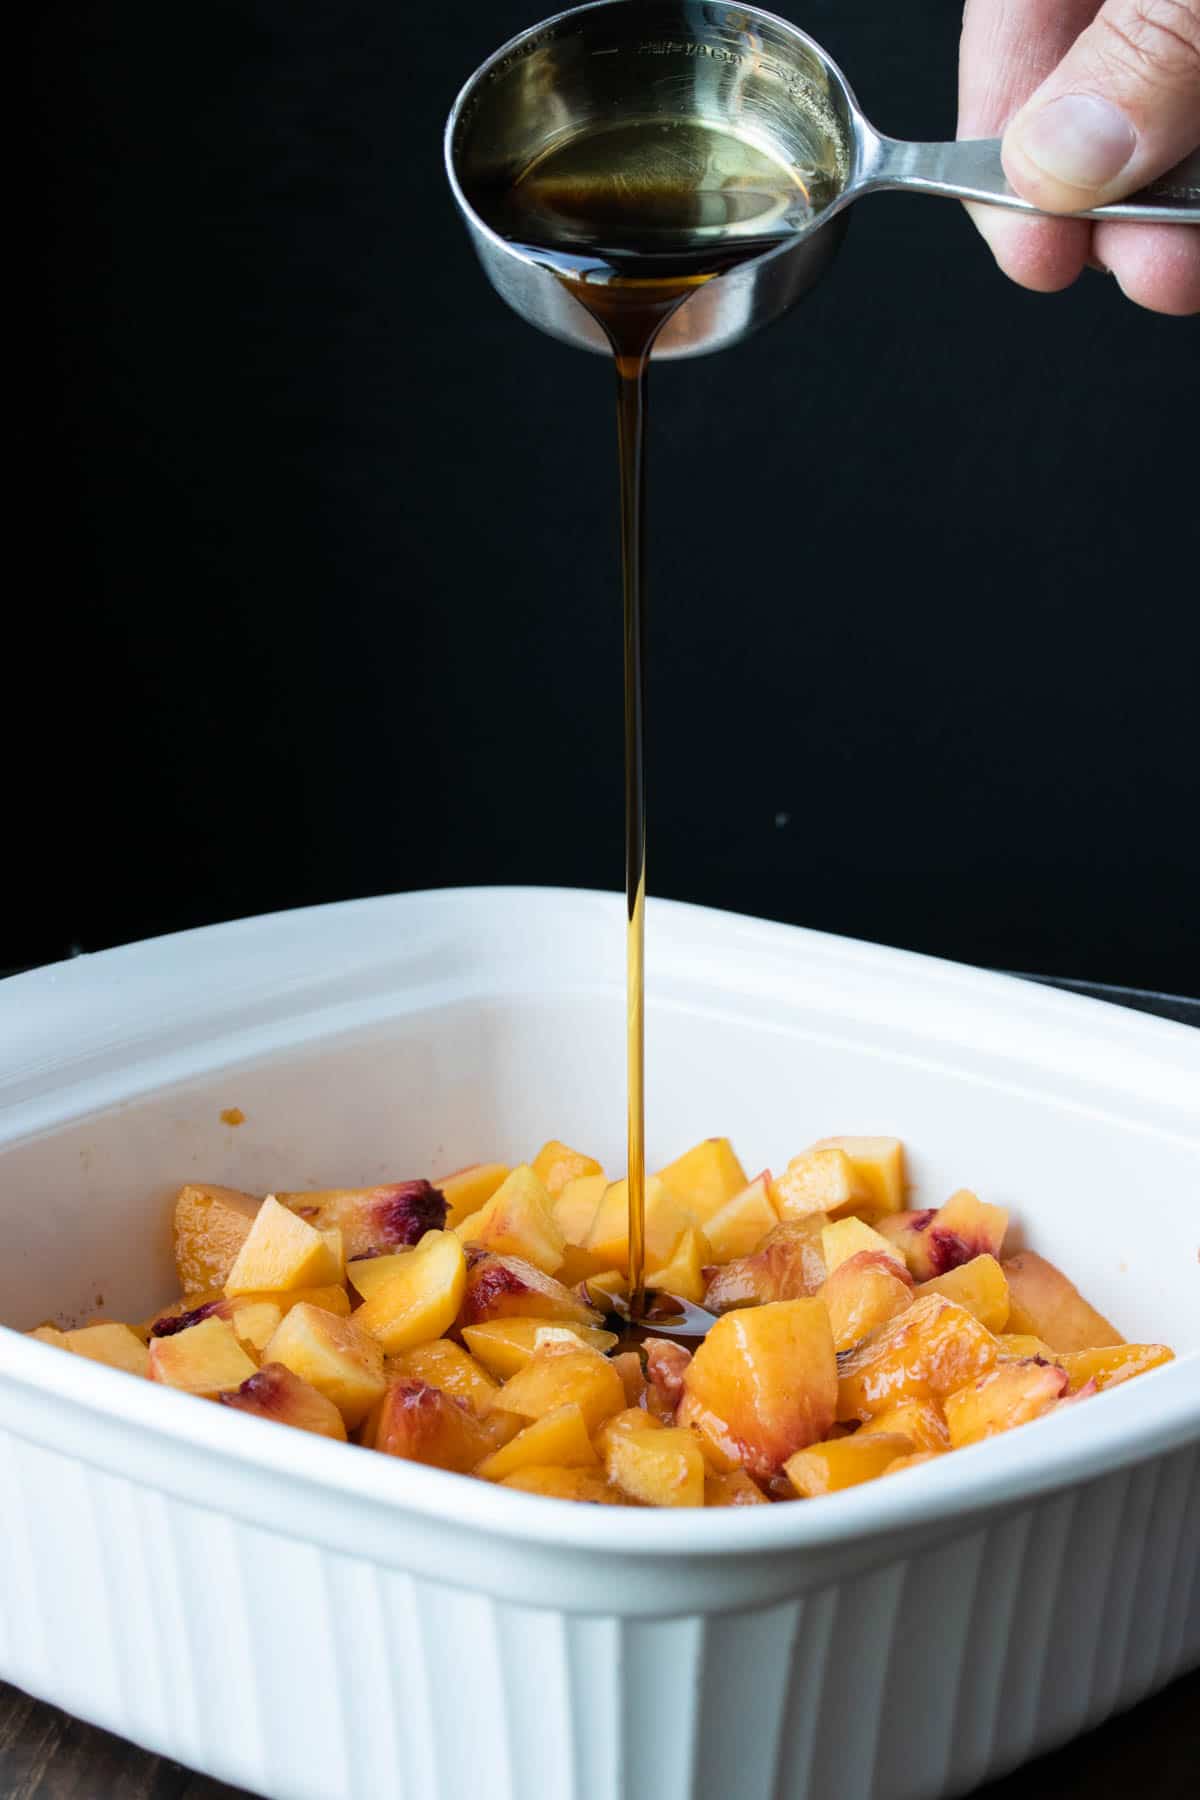 Maple syrup being poured into a white baking dish filled with peaches